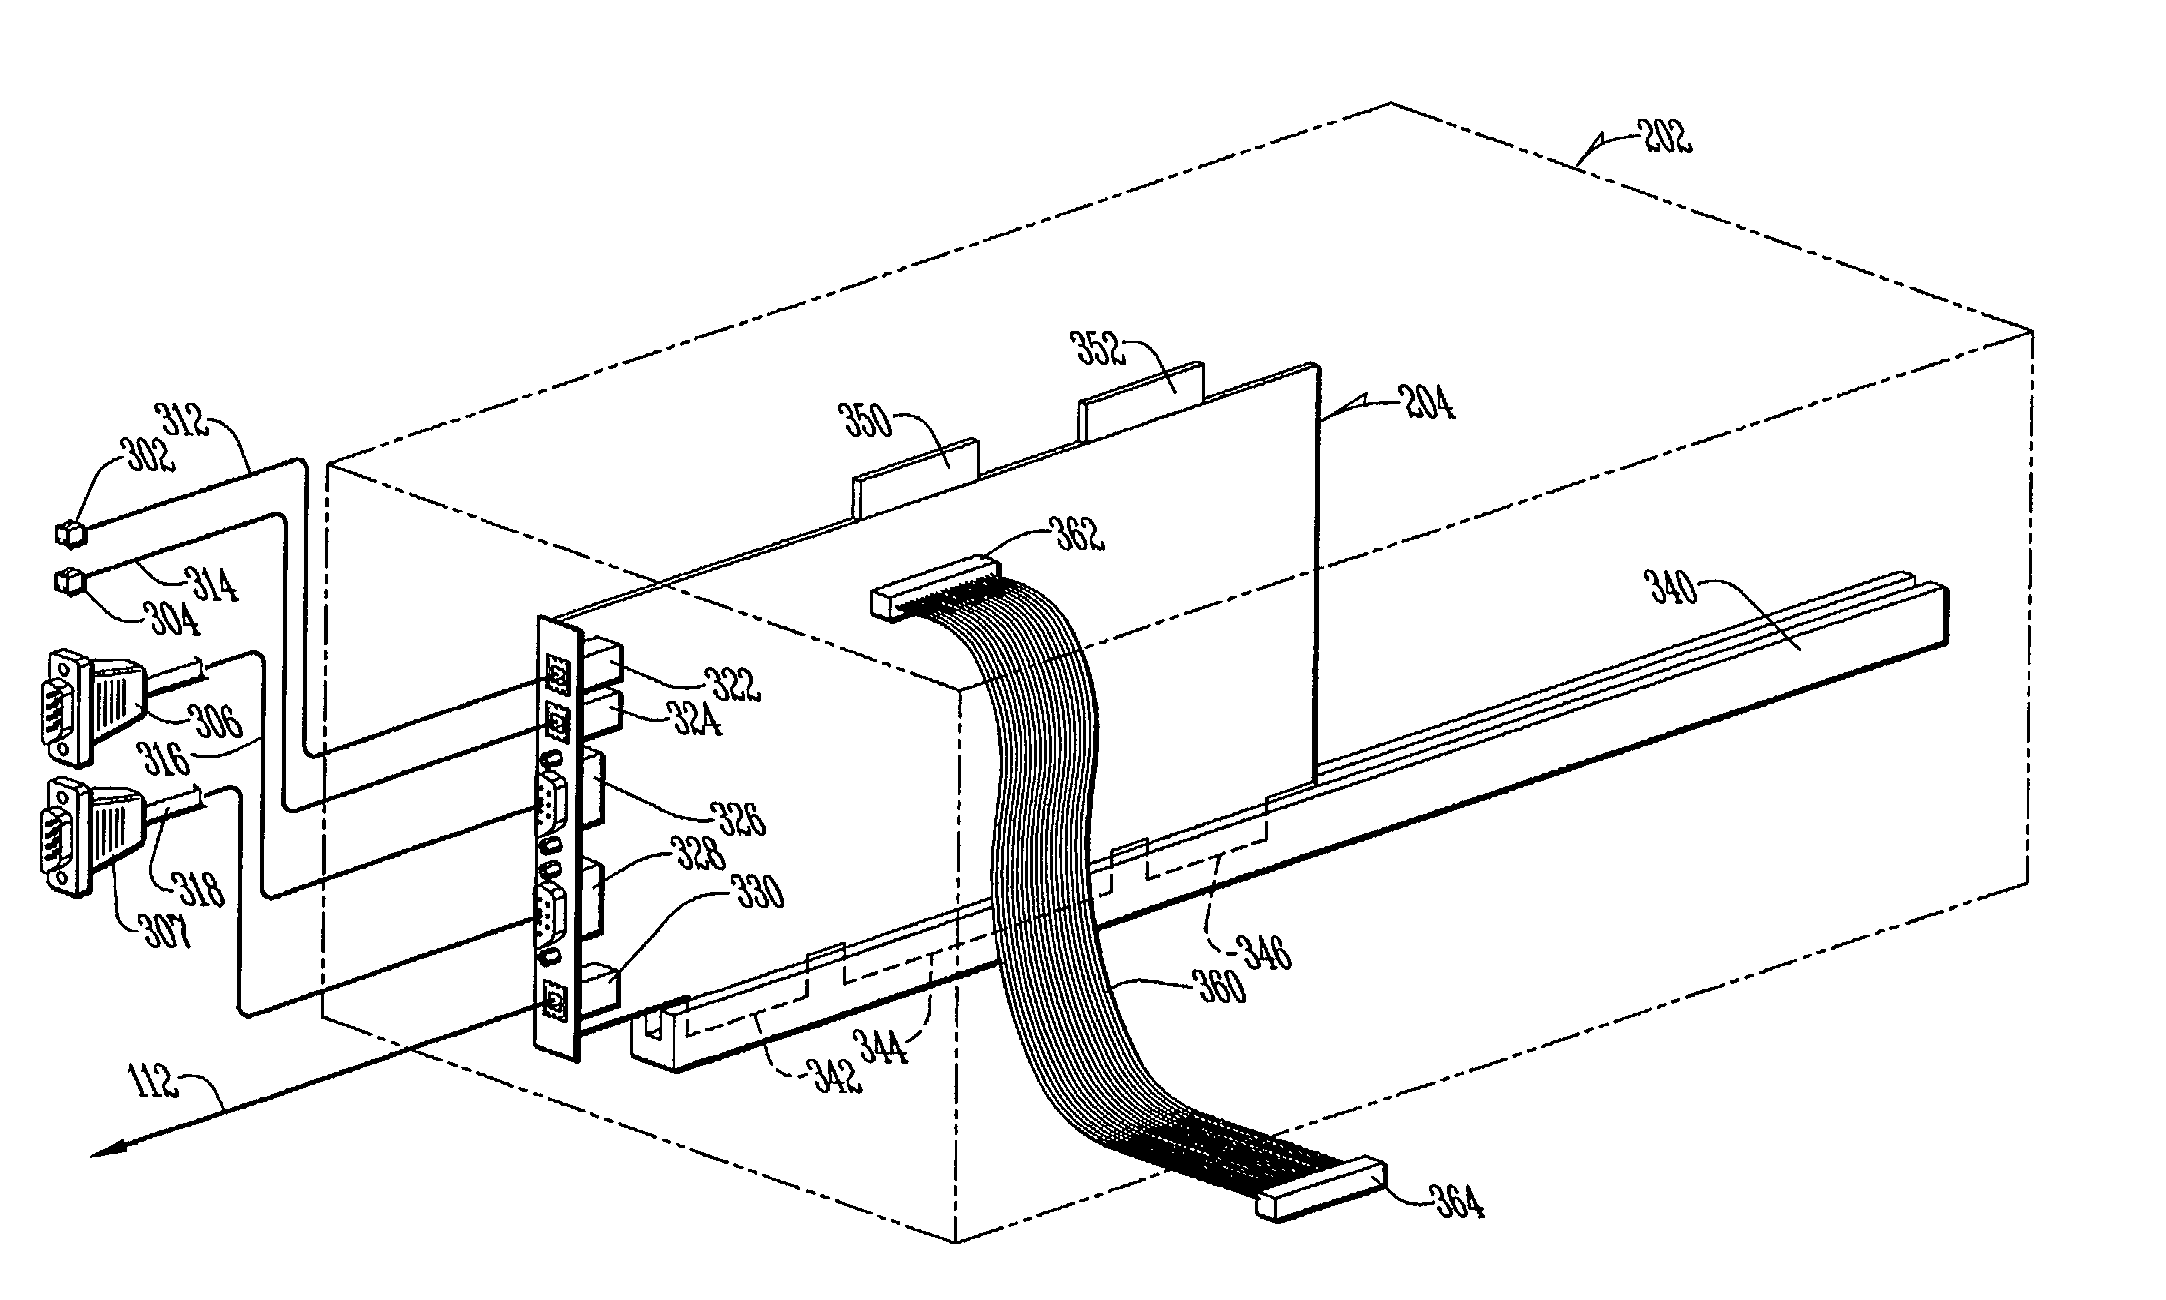 Method and system for extending a distance between a personal computer and a keyboard, video display, a mouse, and serial port